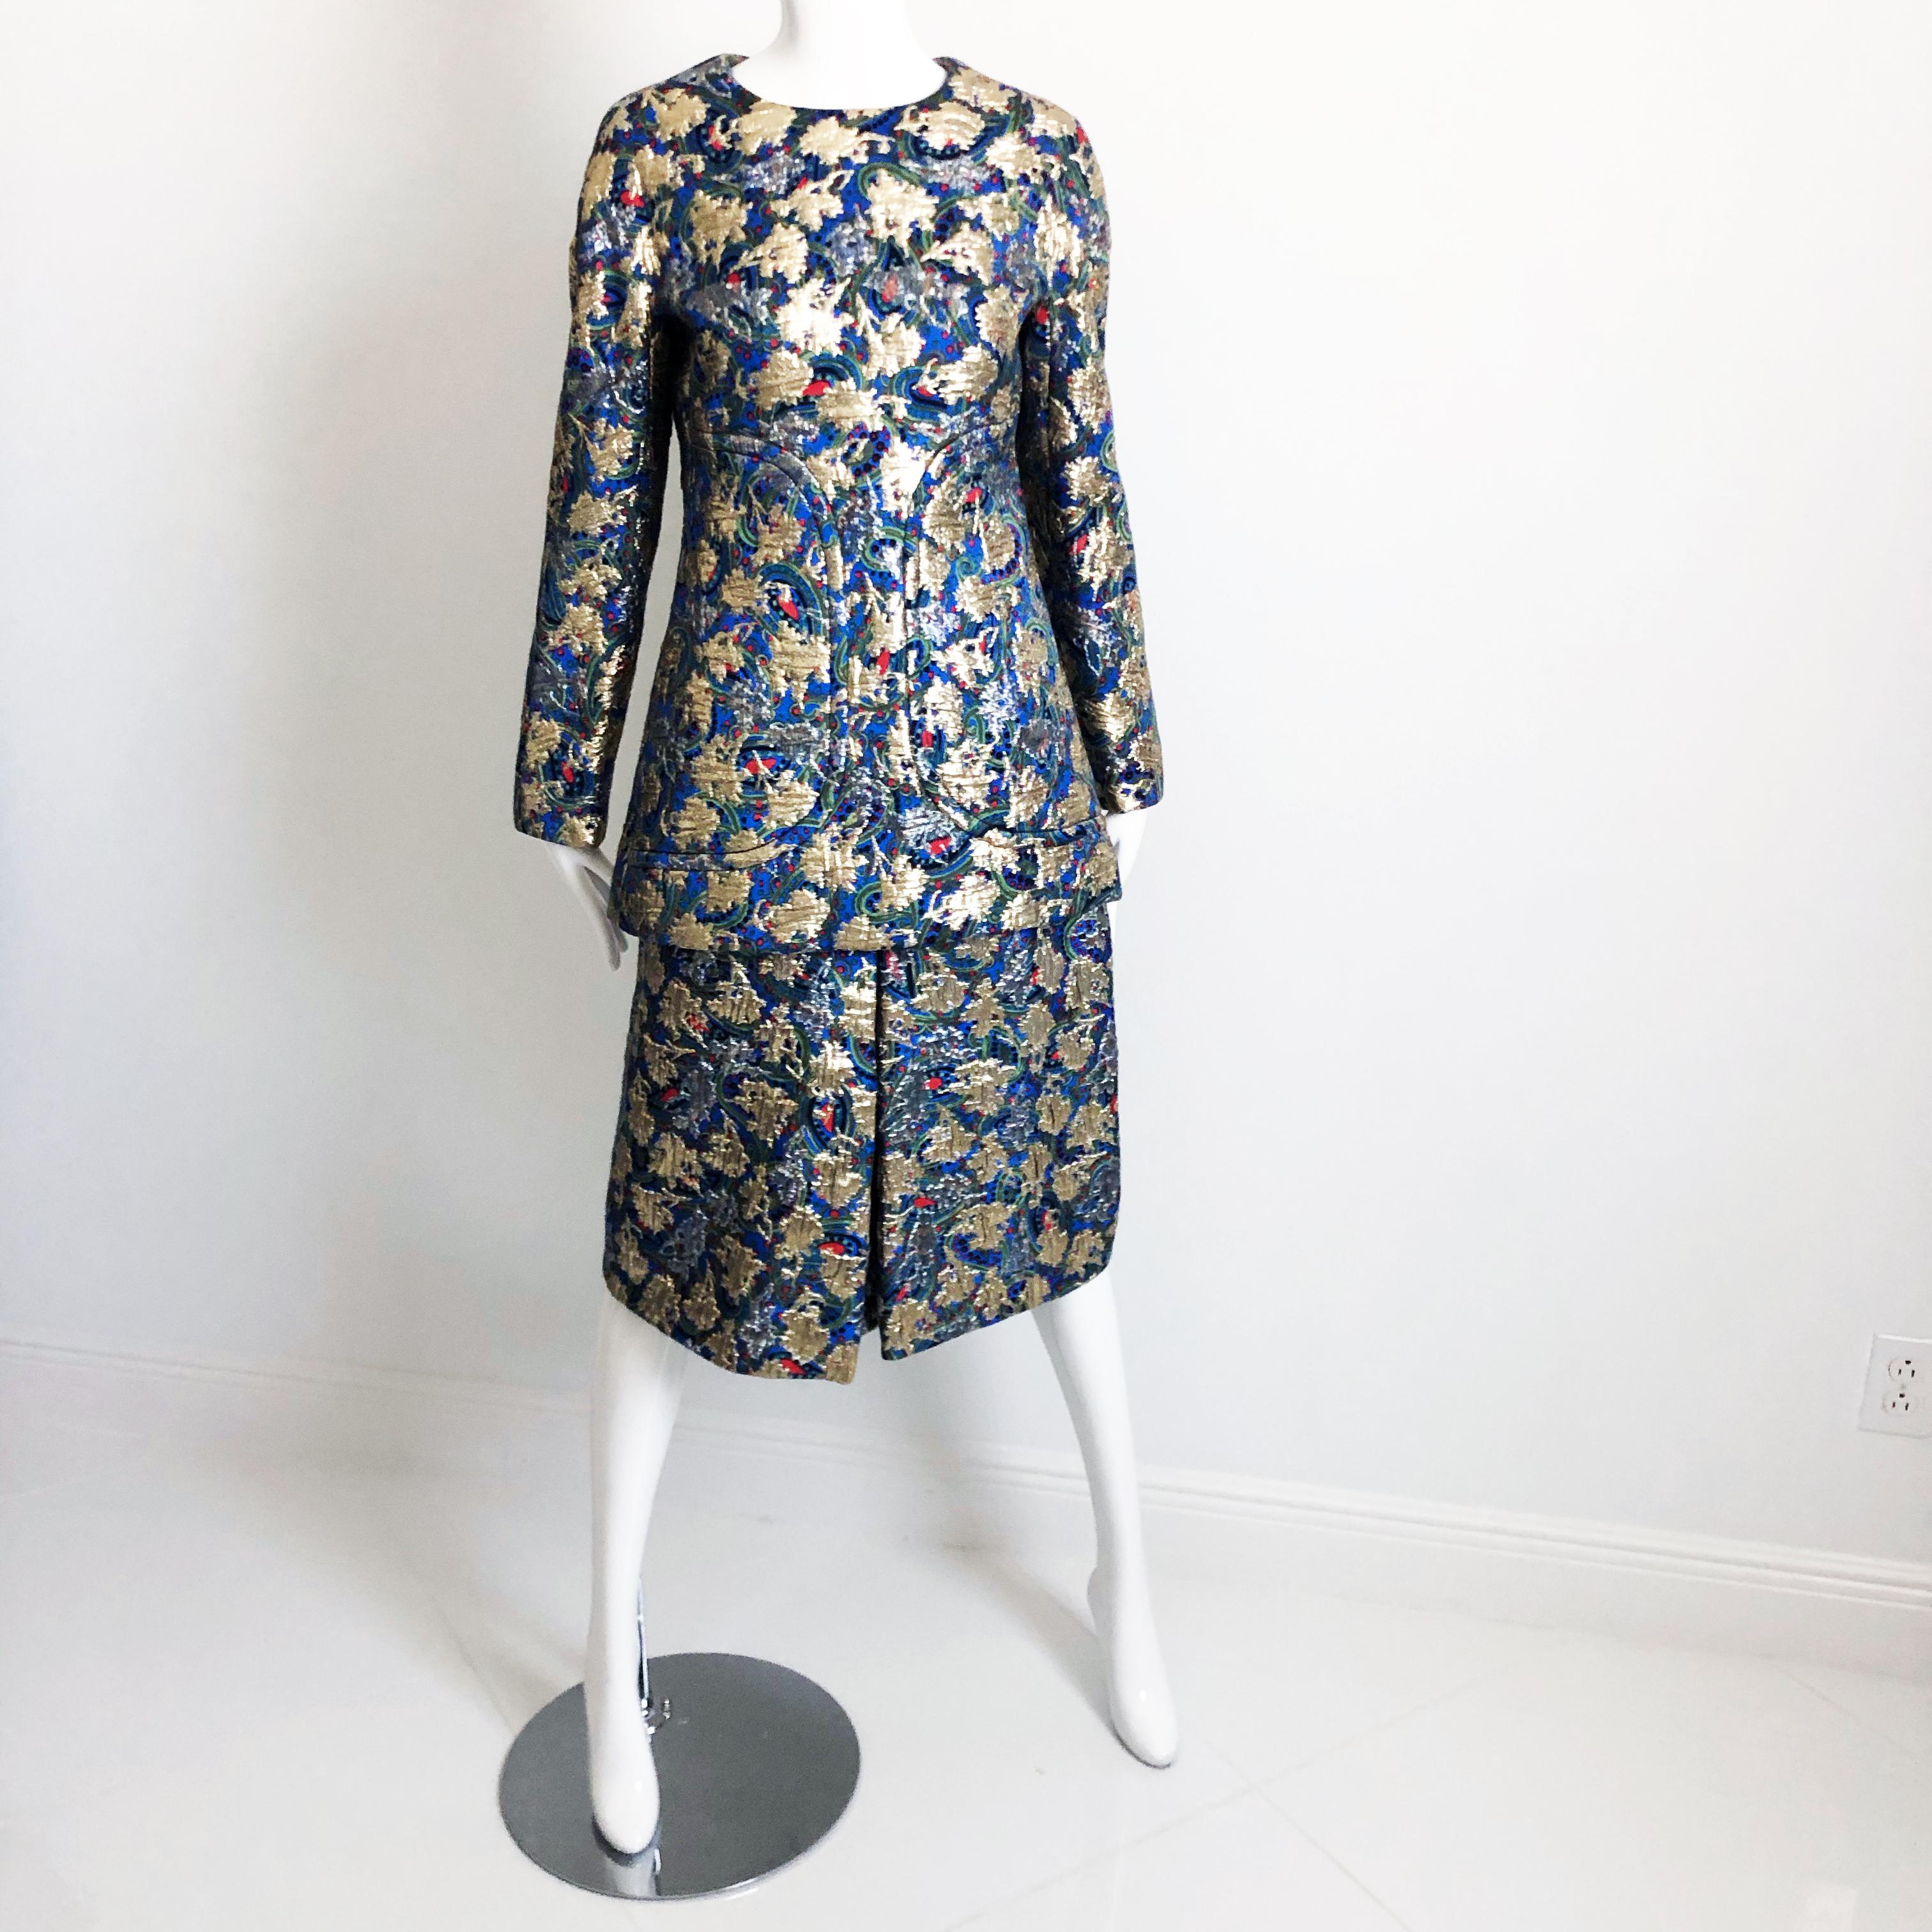 Galanos Metallic Brocade Suit 3pc Top, Long Vest and Skirt Vintage 60s Retro  For Sale 4